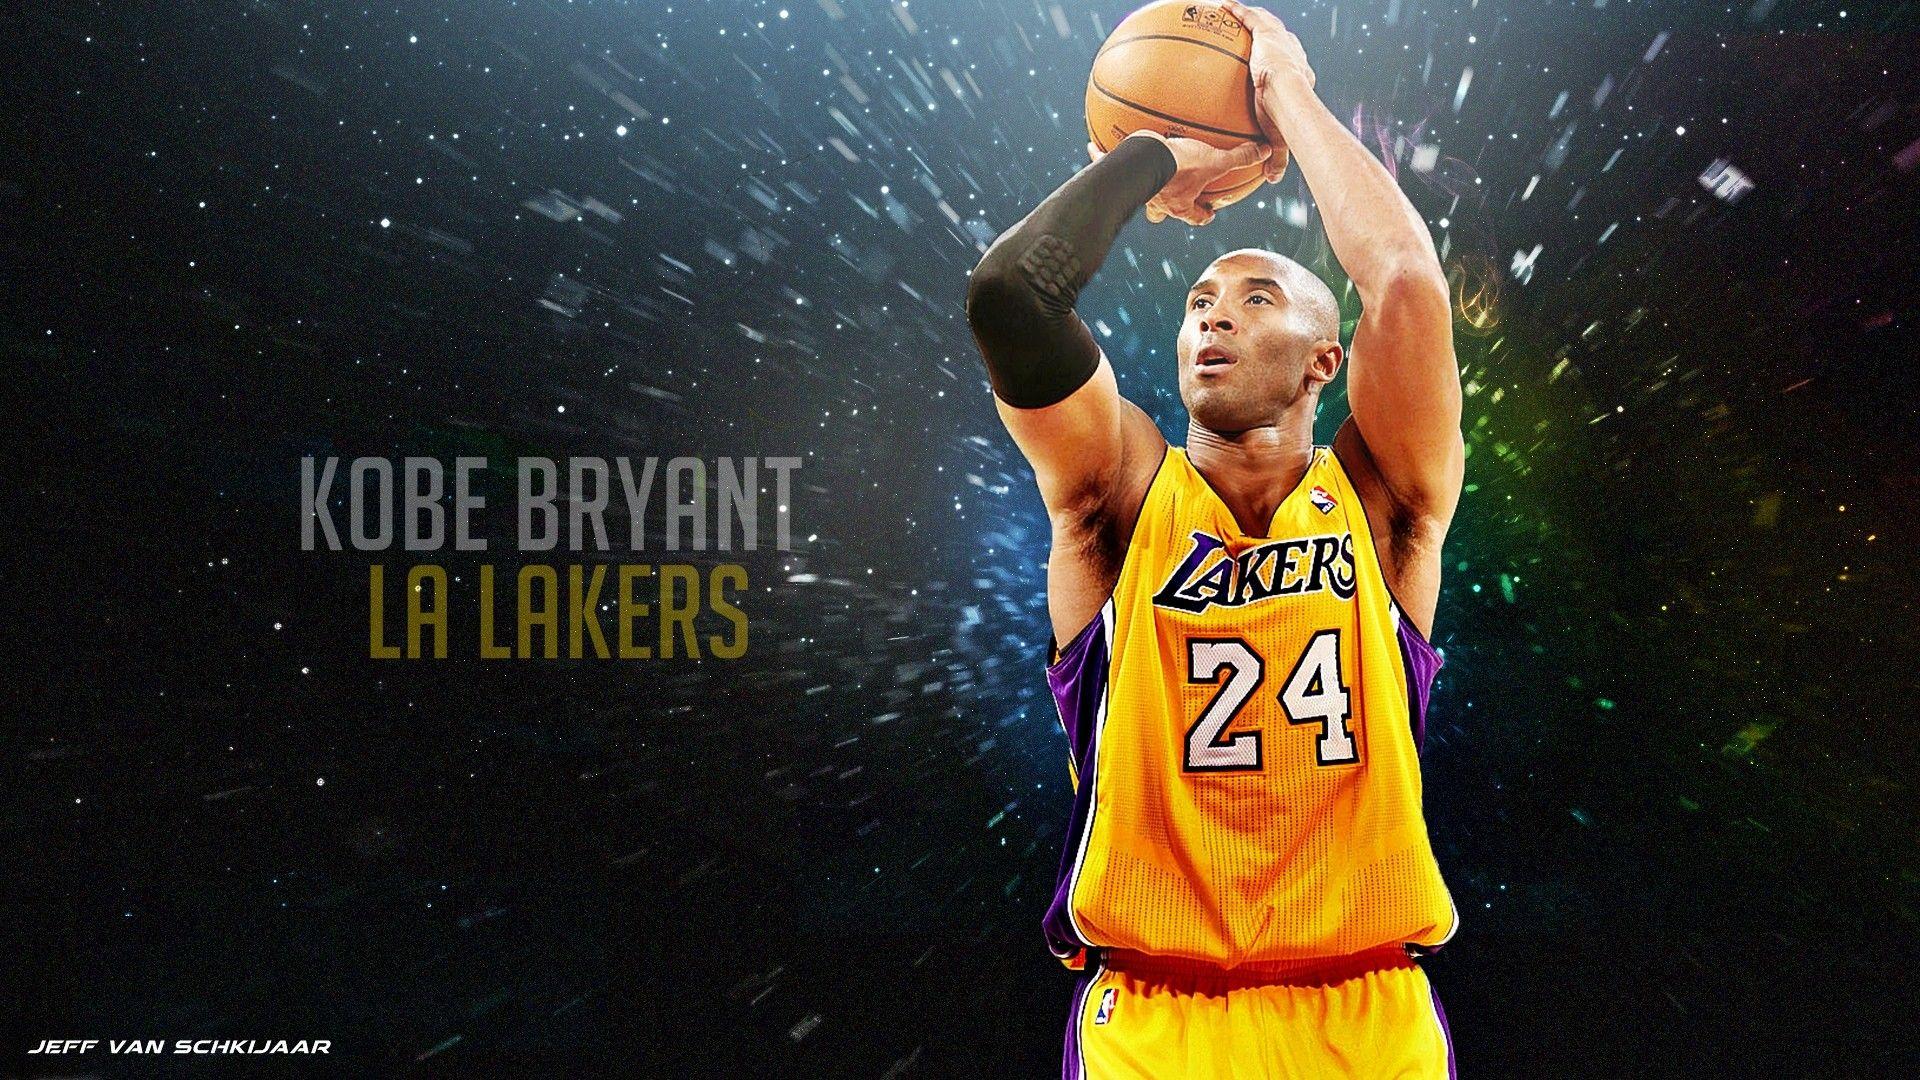 Kobe Bryant Quotes Wallpapers - Top Free Kobe Bryant Quotes Backgrounds